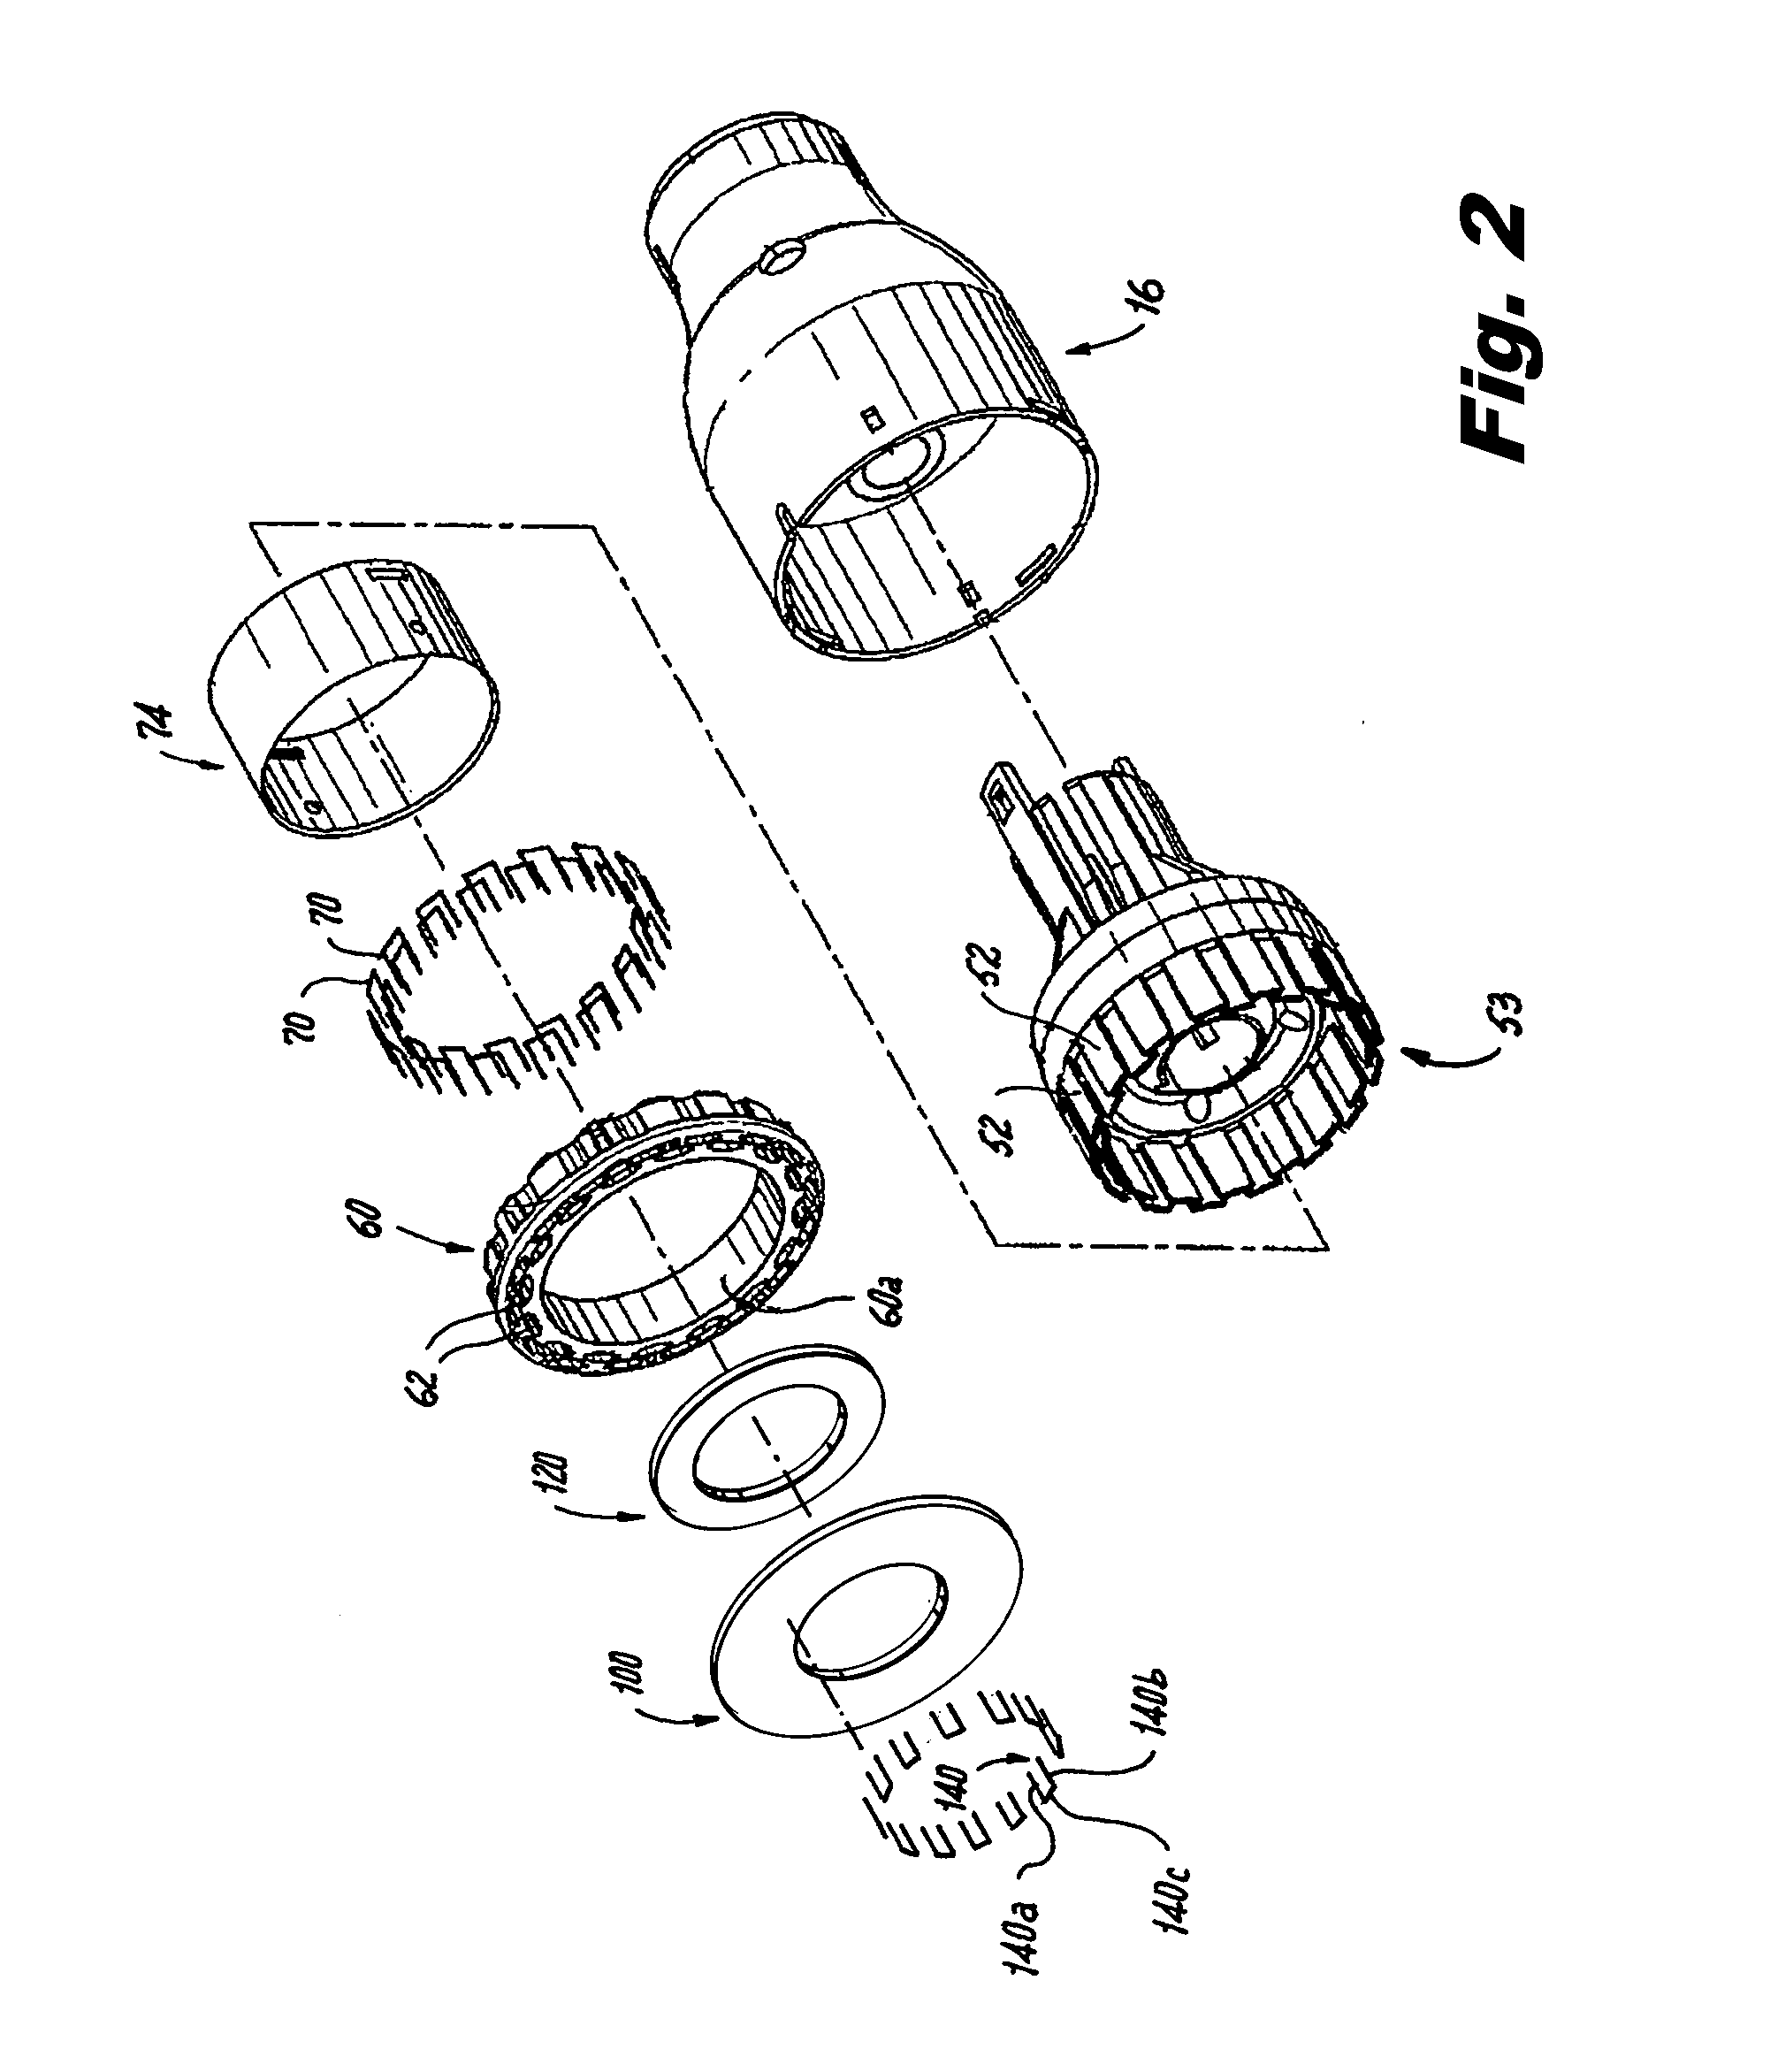 Circular surgical stapling device including buttress material